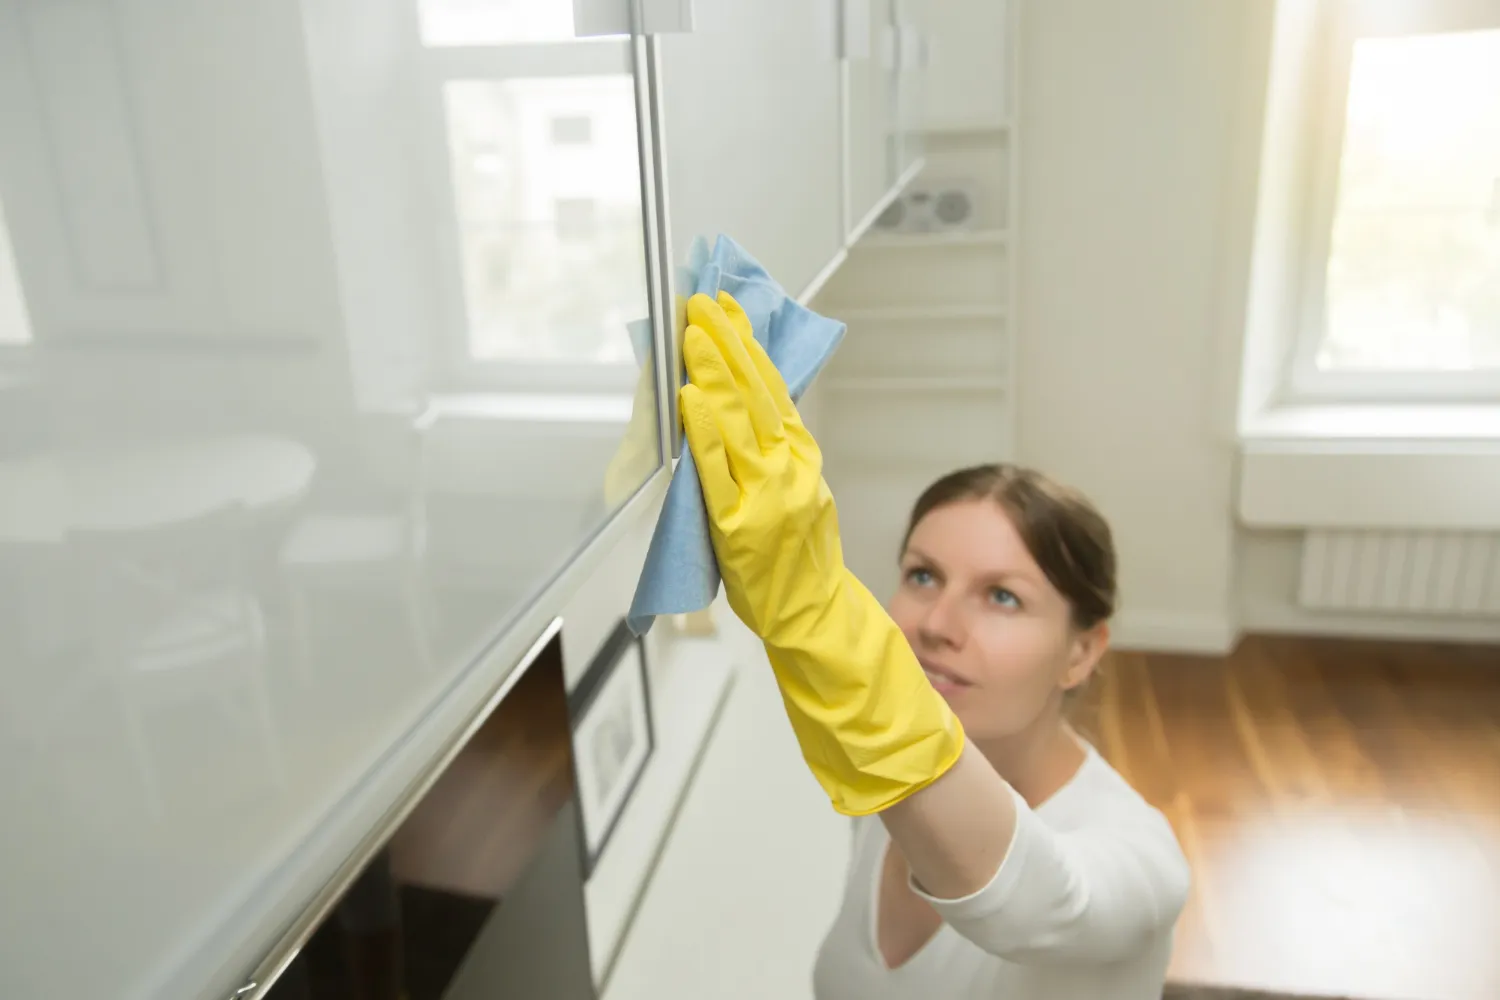 Use a soft cloth or a feather duster to gently wipe away the dust. Avoid using abrasive materials that may scratch the cabinet surface.